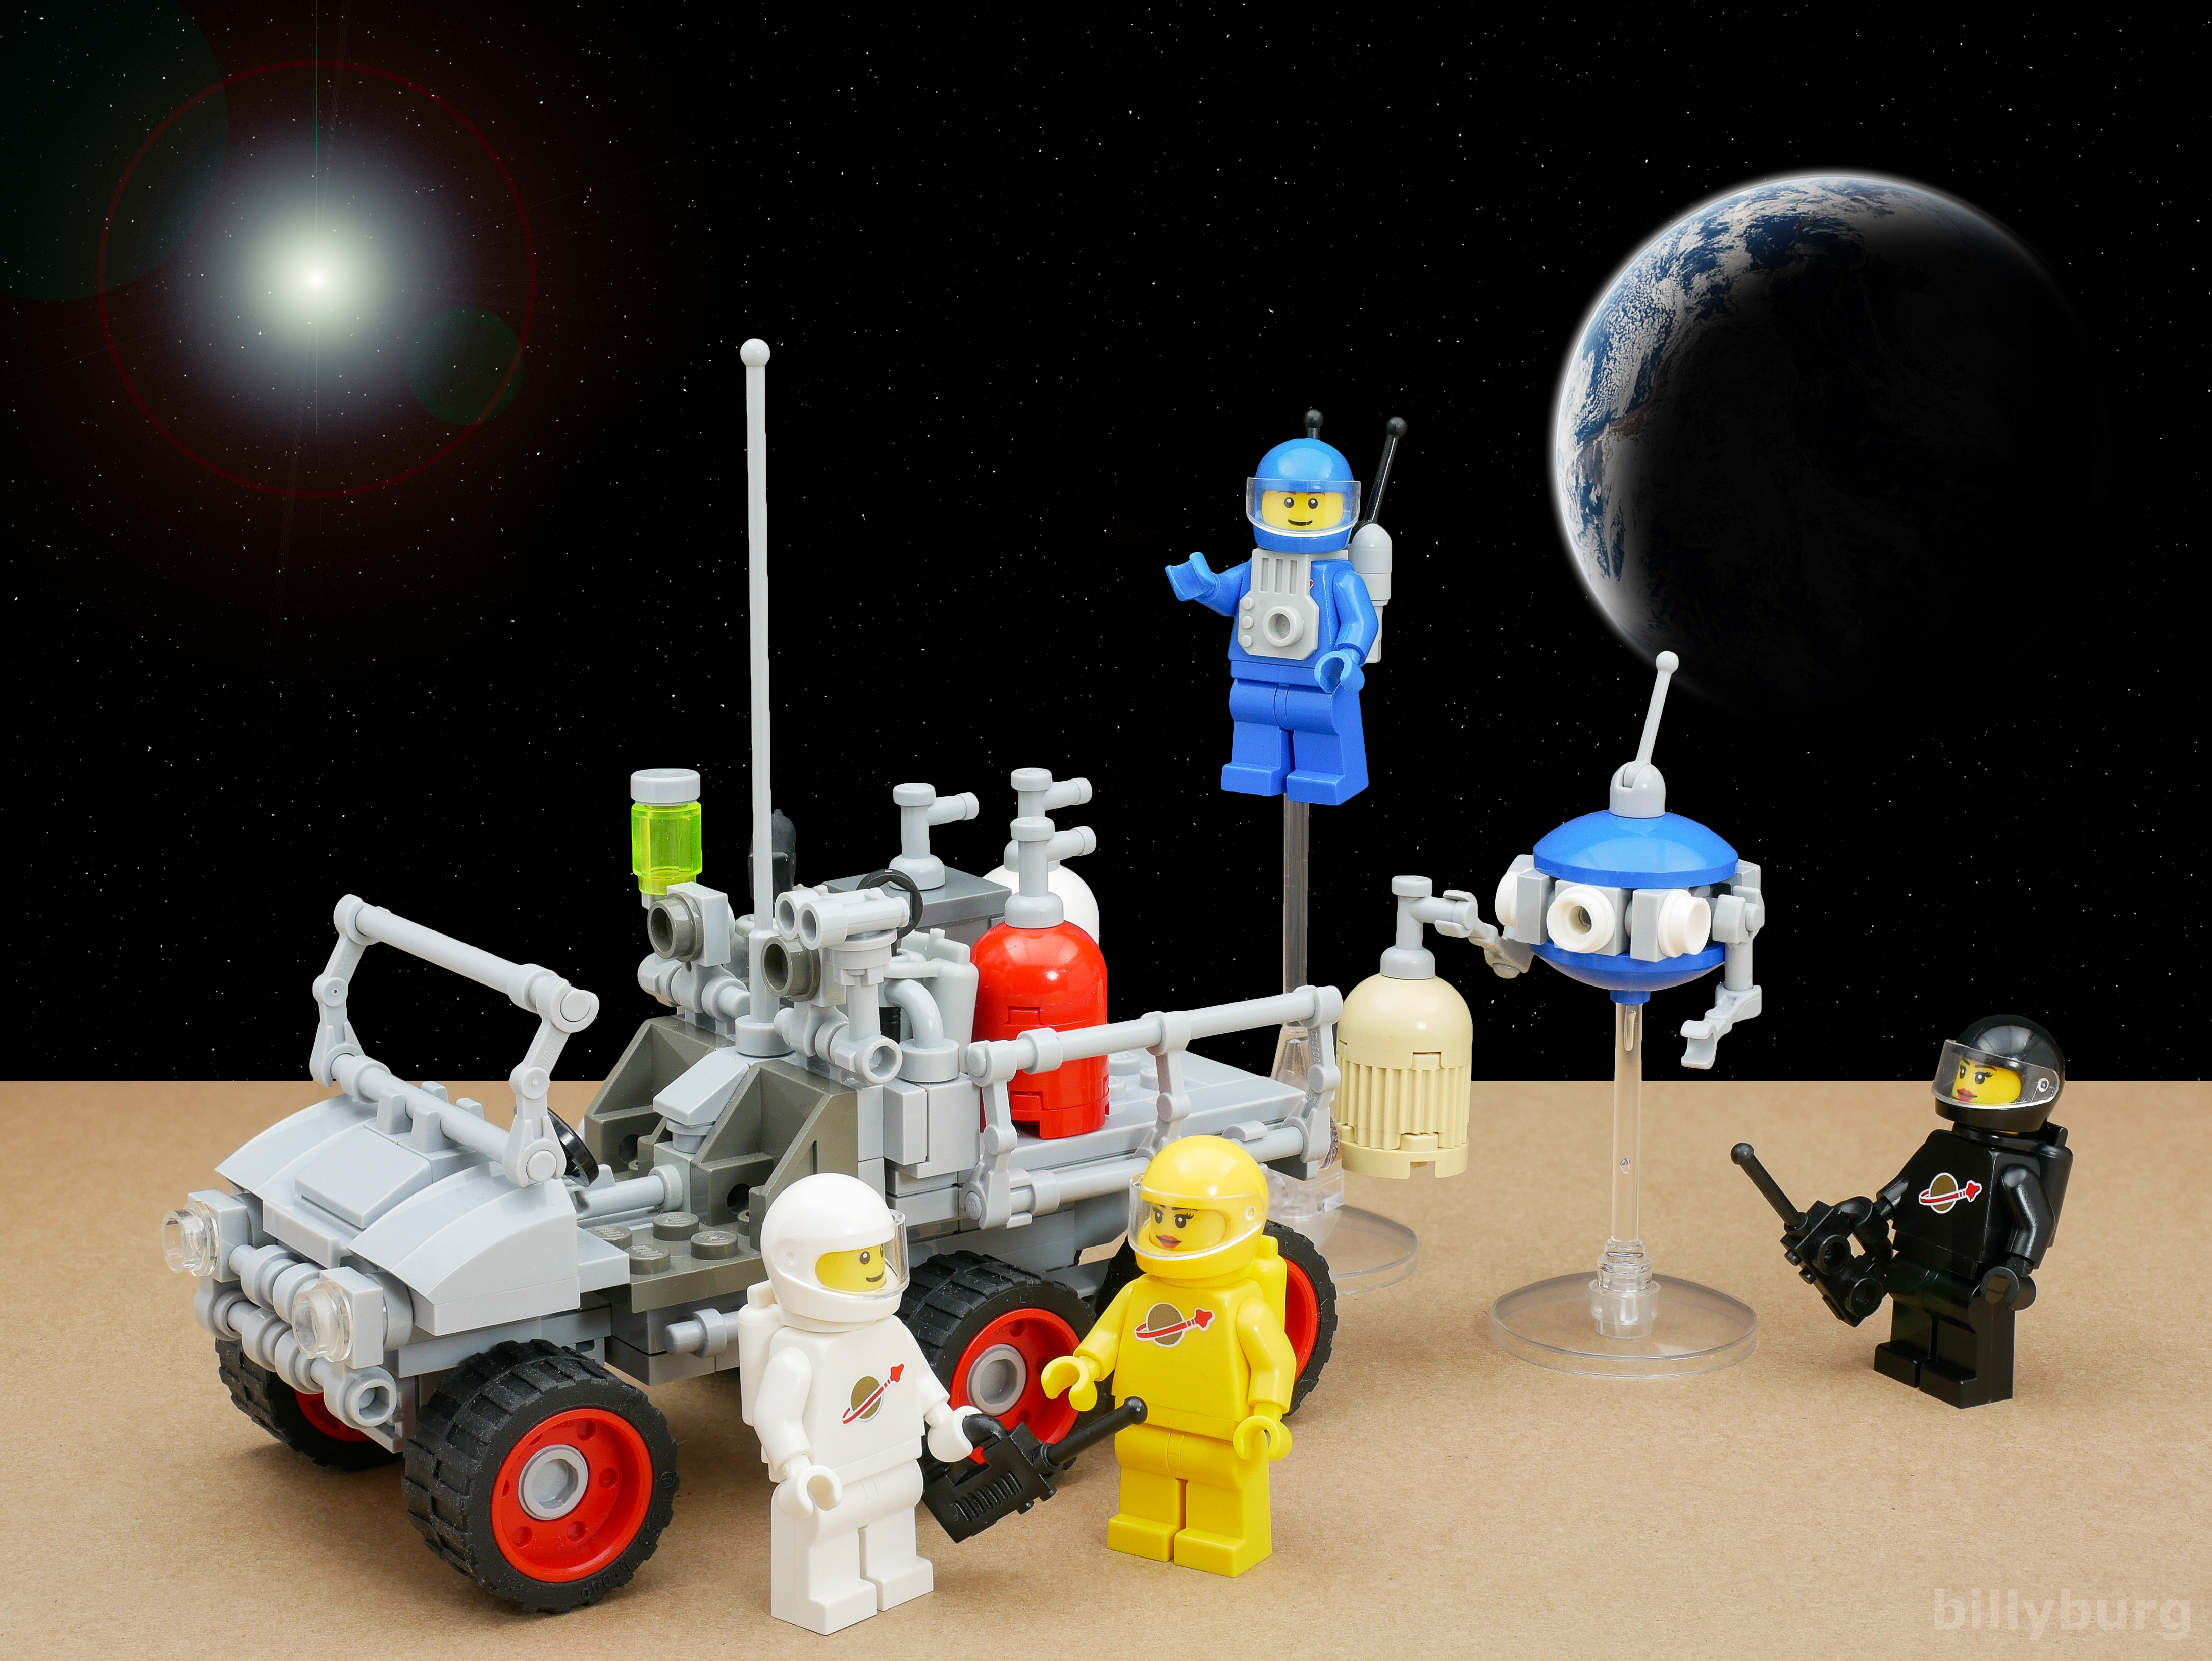 Wallpaper, Toy, LEGO, space, product, astronaut, technology, spacecraft 4381x3290